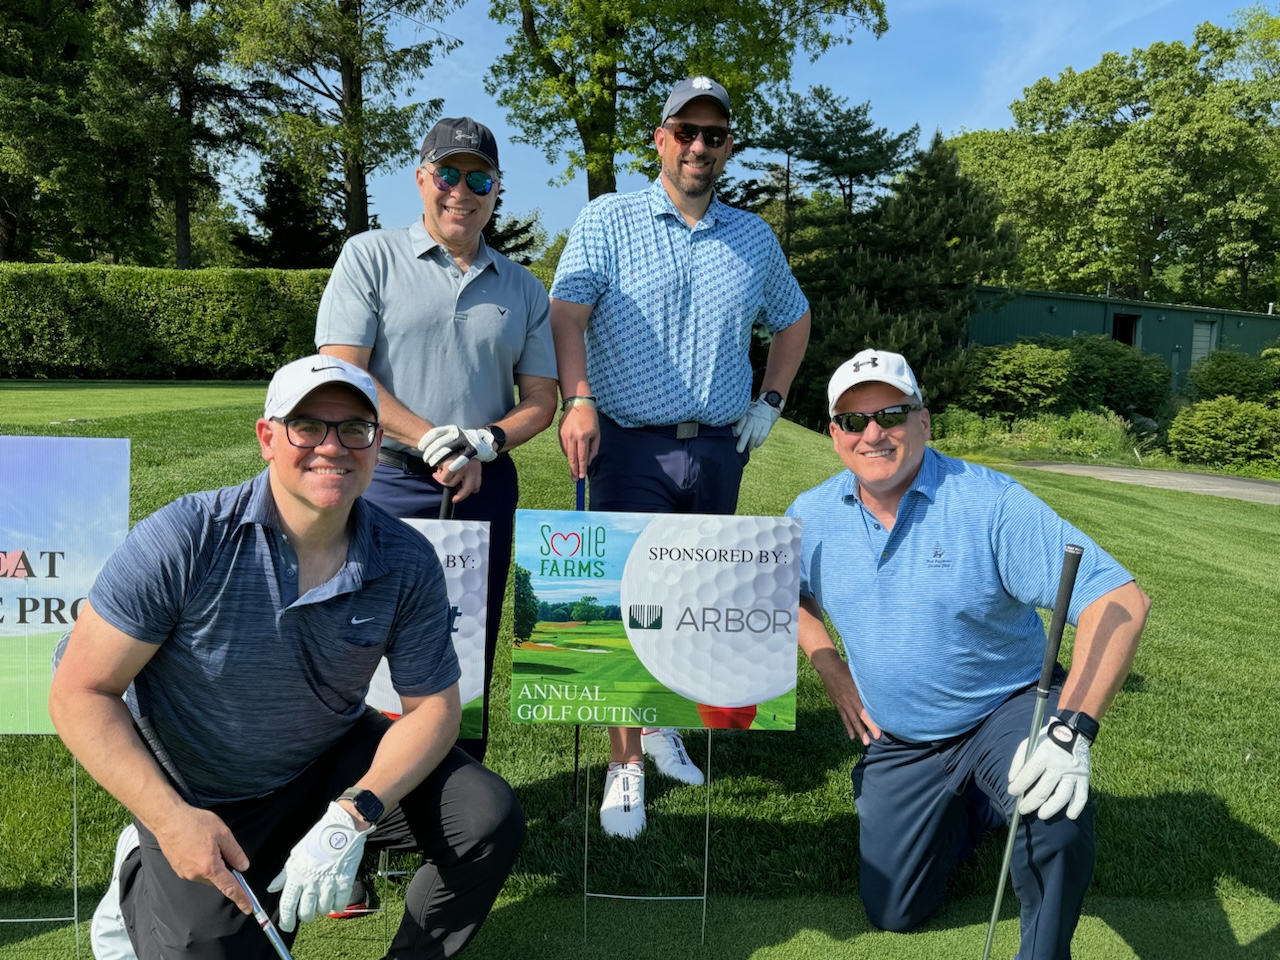 Four Arbor employees pose around a sponsorship sign on a golf course at the Smile Farms Golf Outing.